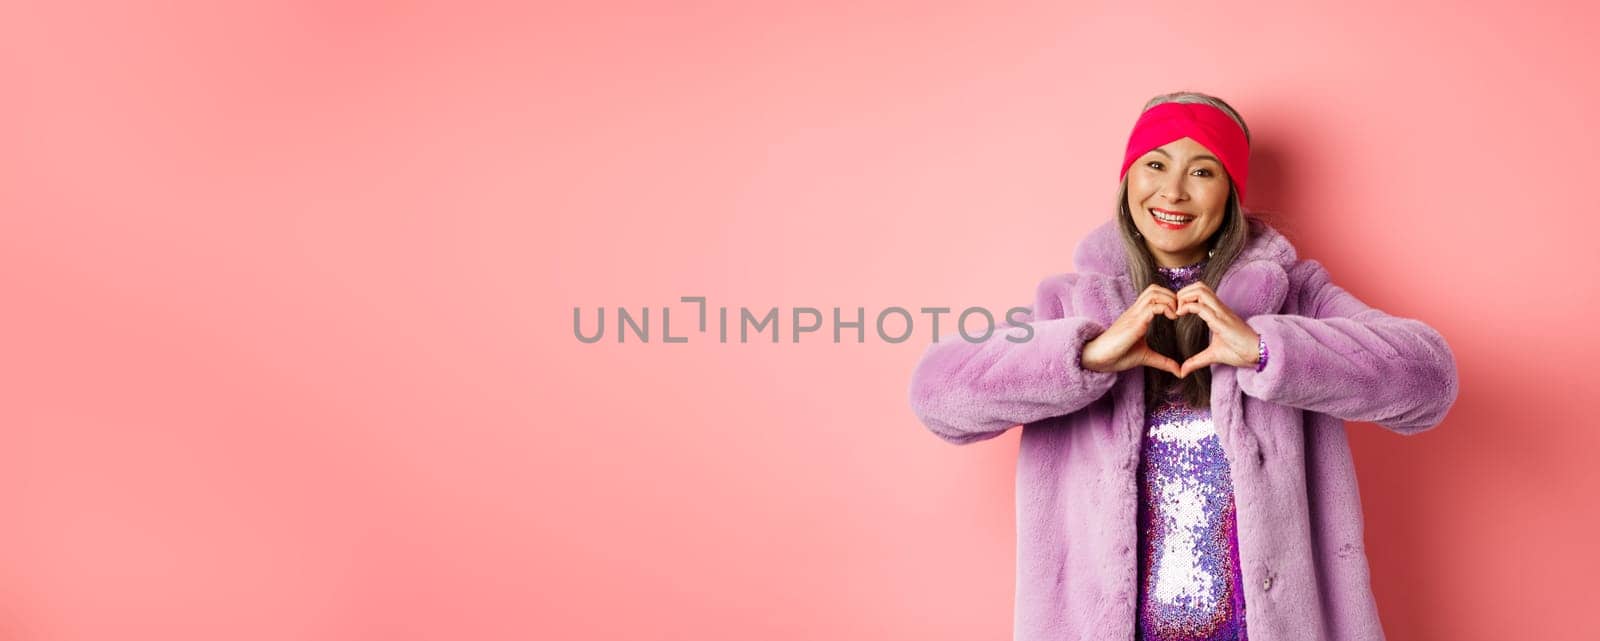 Romance and valentines day. Happy asian senior woman showing heart sign, I love you gesture, smiling and looking caring at camera, standing in faux fur coat, pink background.